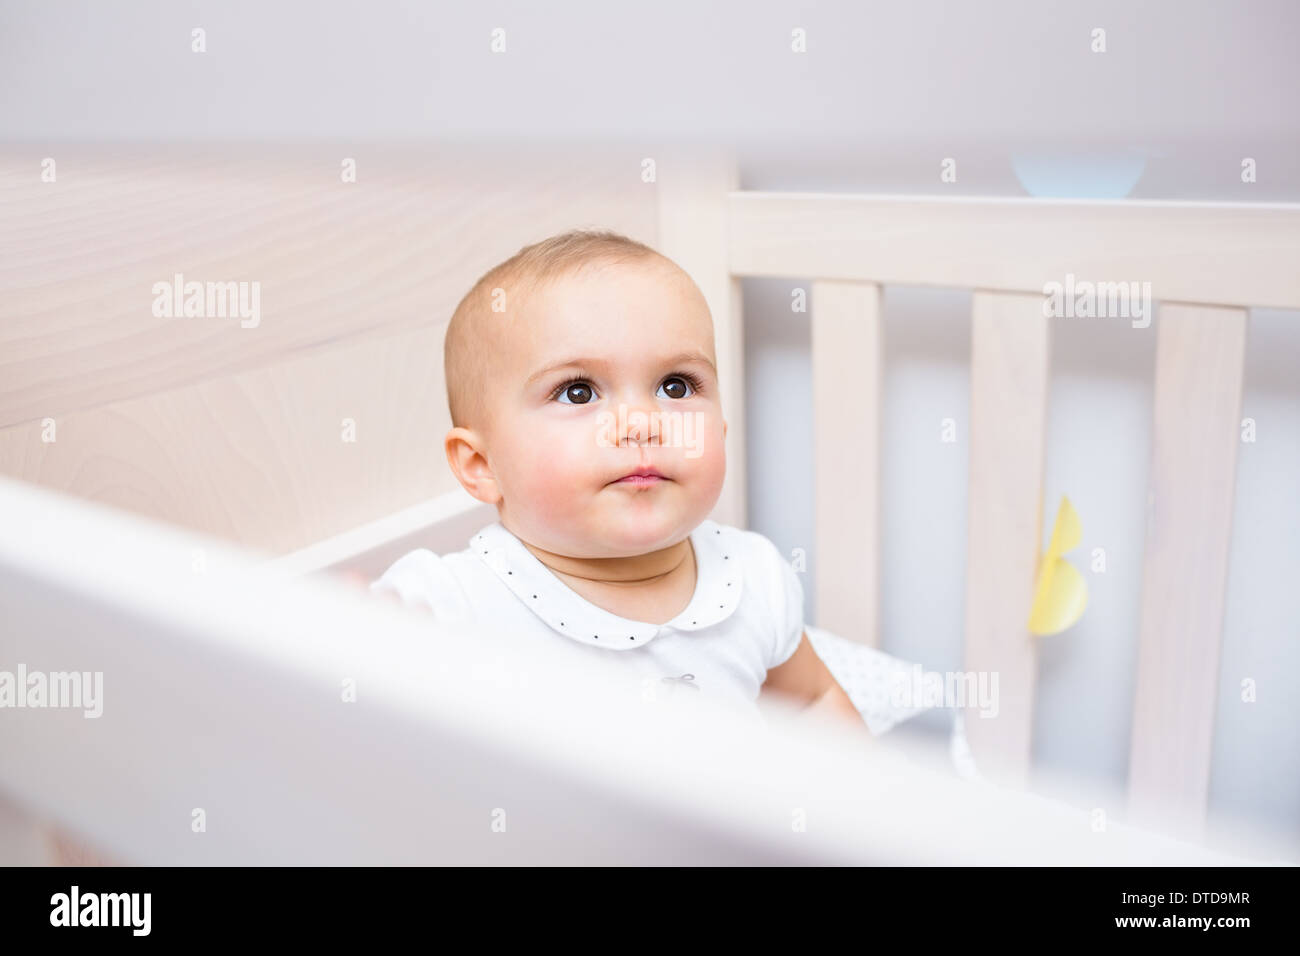 Closeup of a cute baby looking up in crib Stock Photo